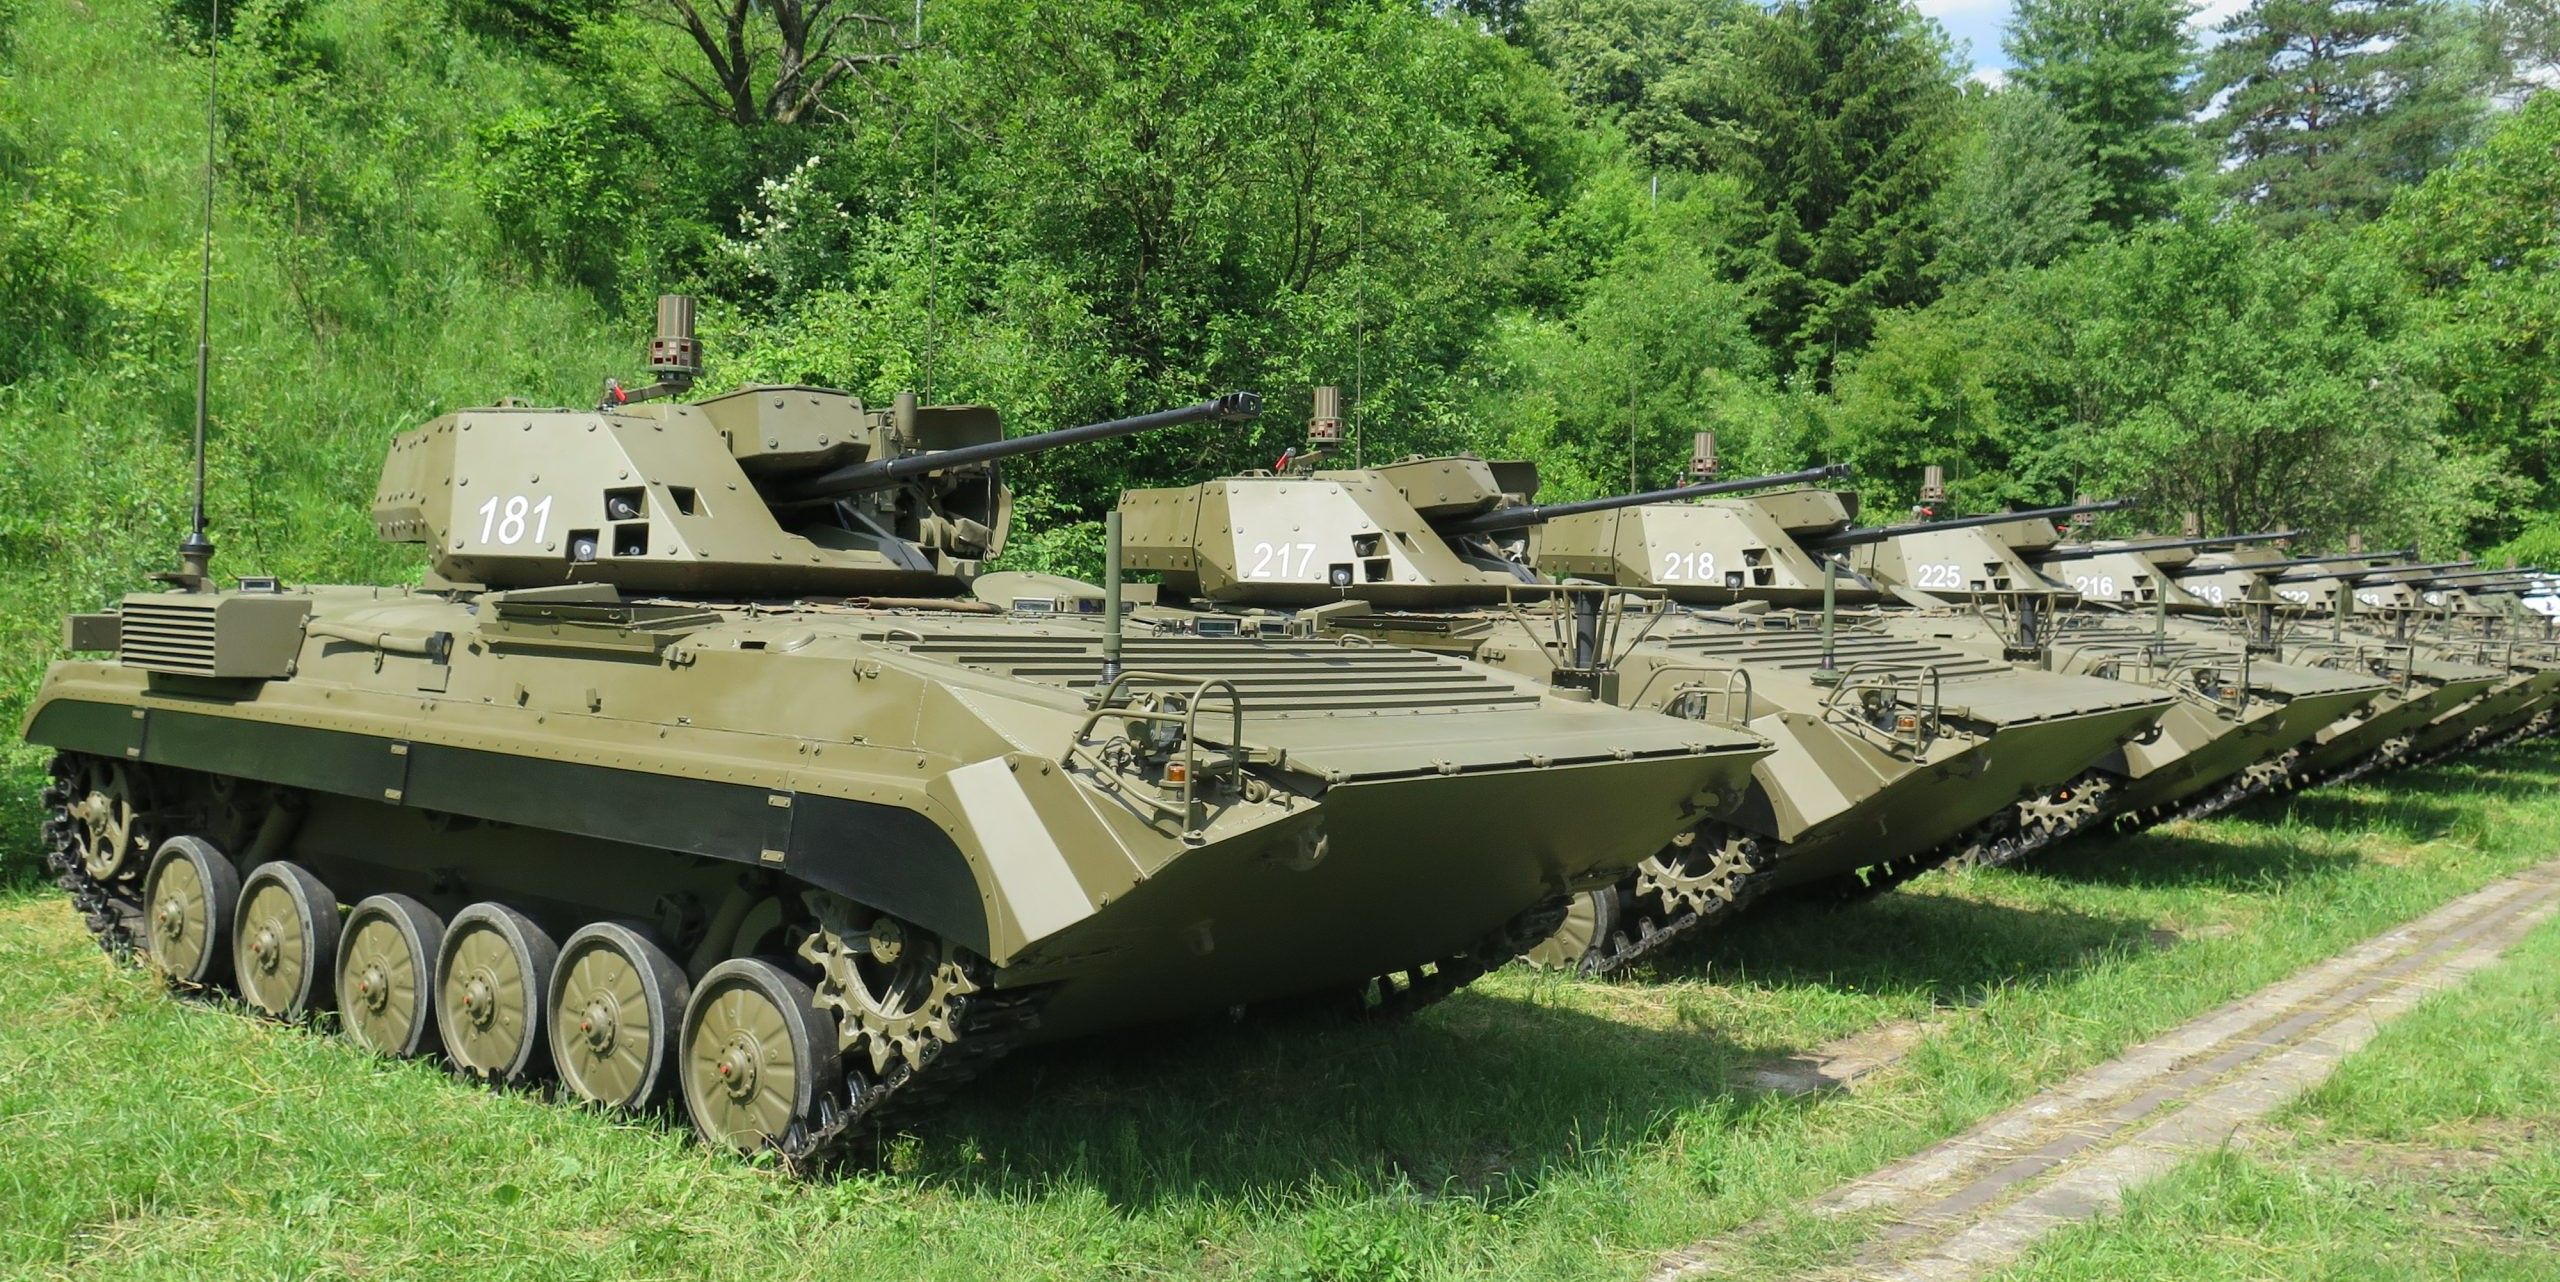 Slovakia will receive 15 Leopard 2A4 tanks from Germany